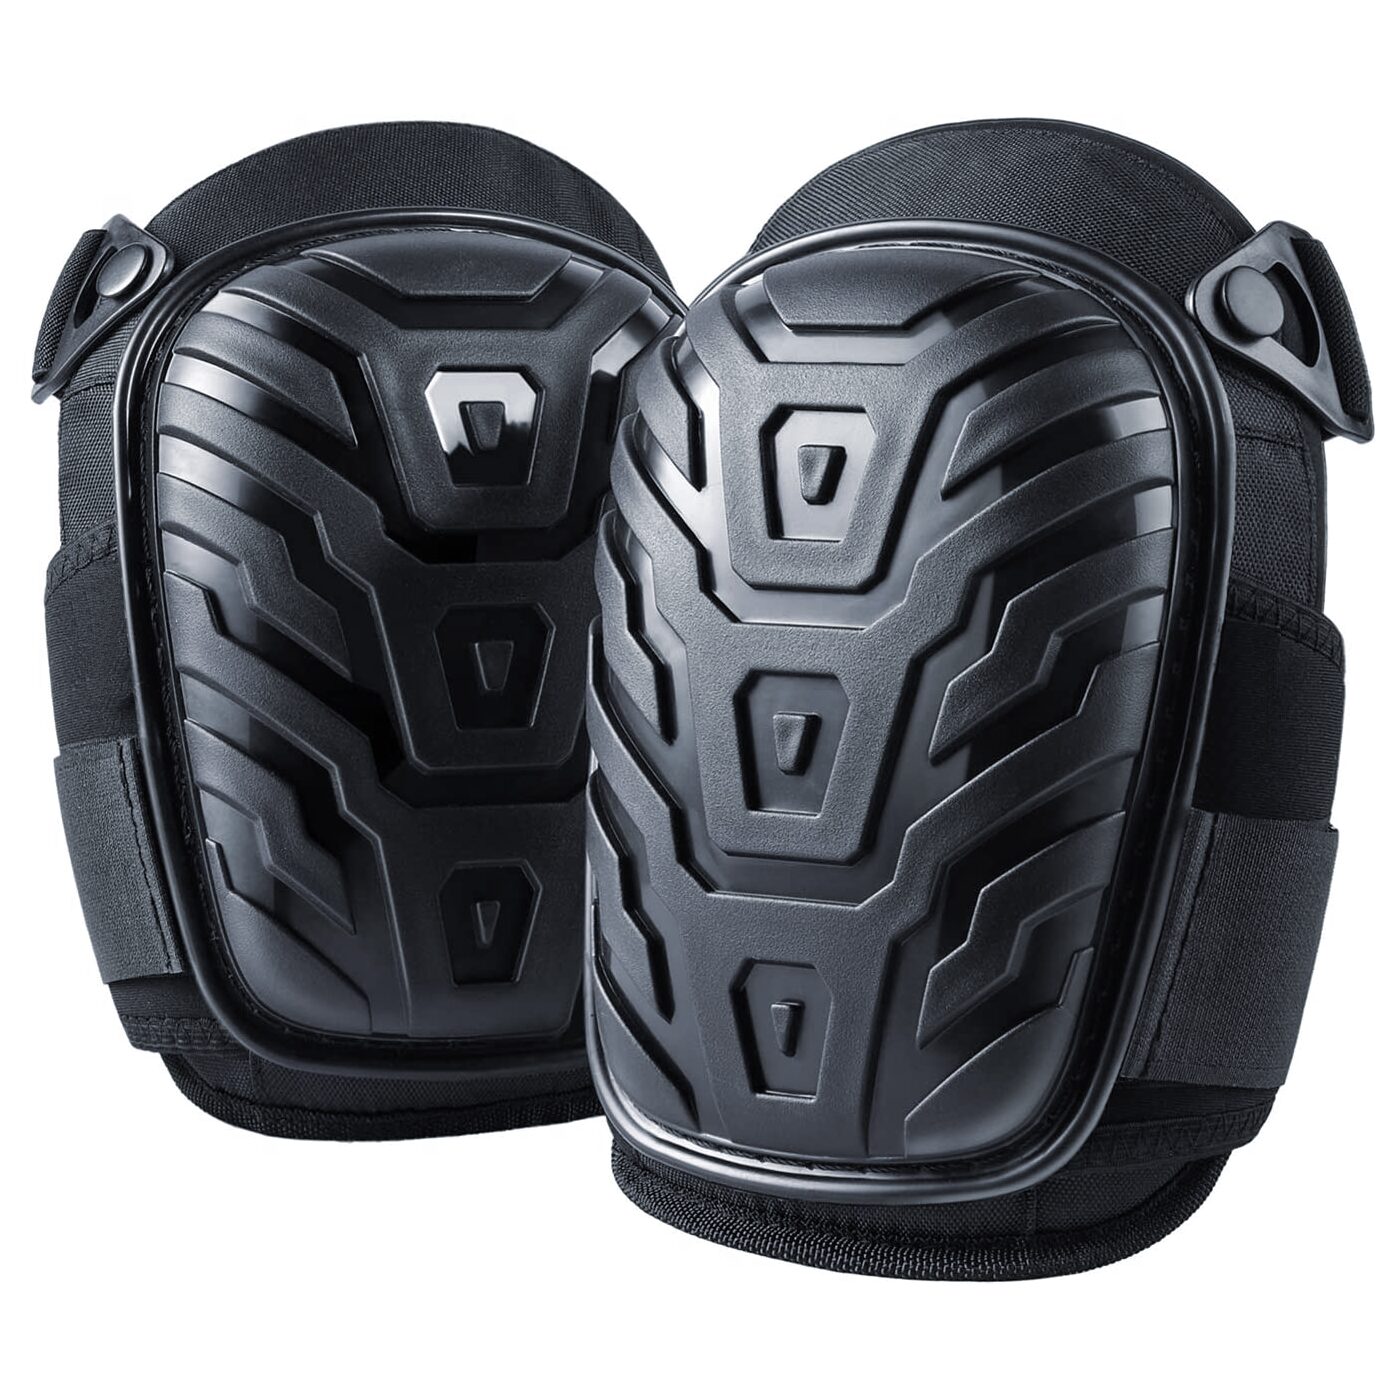 knee protectors for construction and DIY work